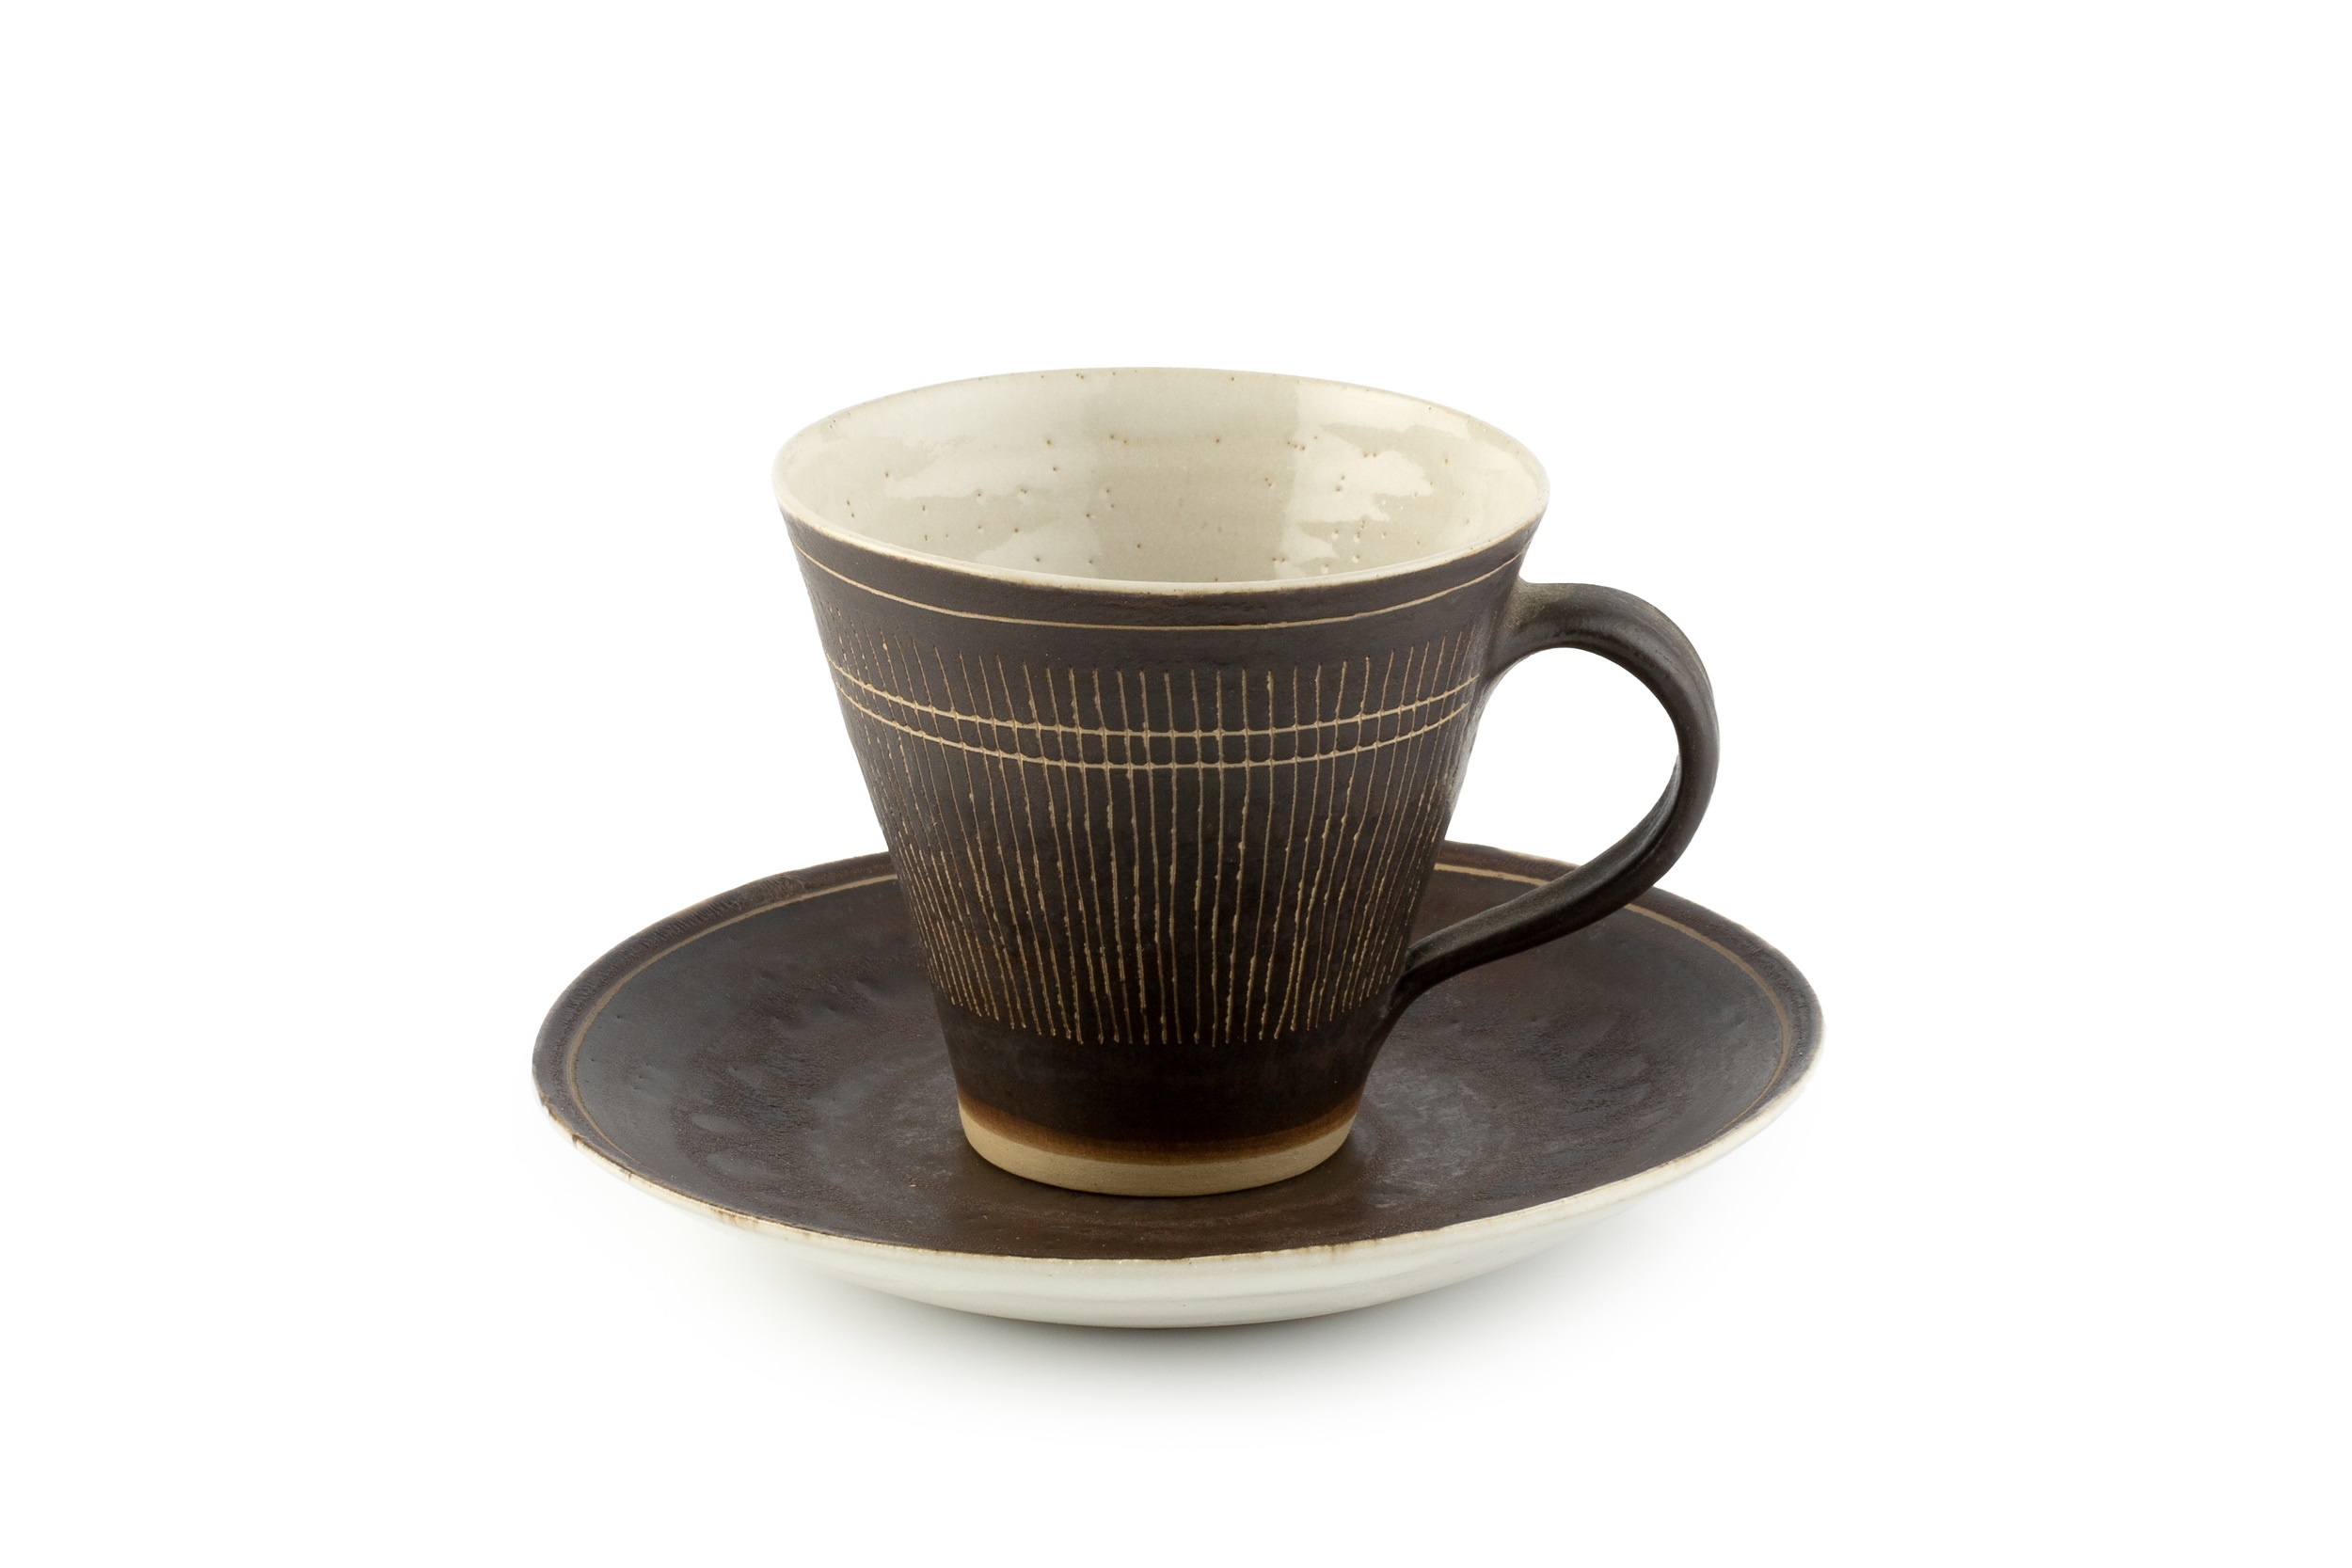 Lucie Rie (1902-1995) Cup and saucer manganese glaze, sgraffito decoration impressed potter's seal